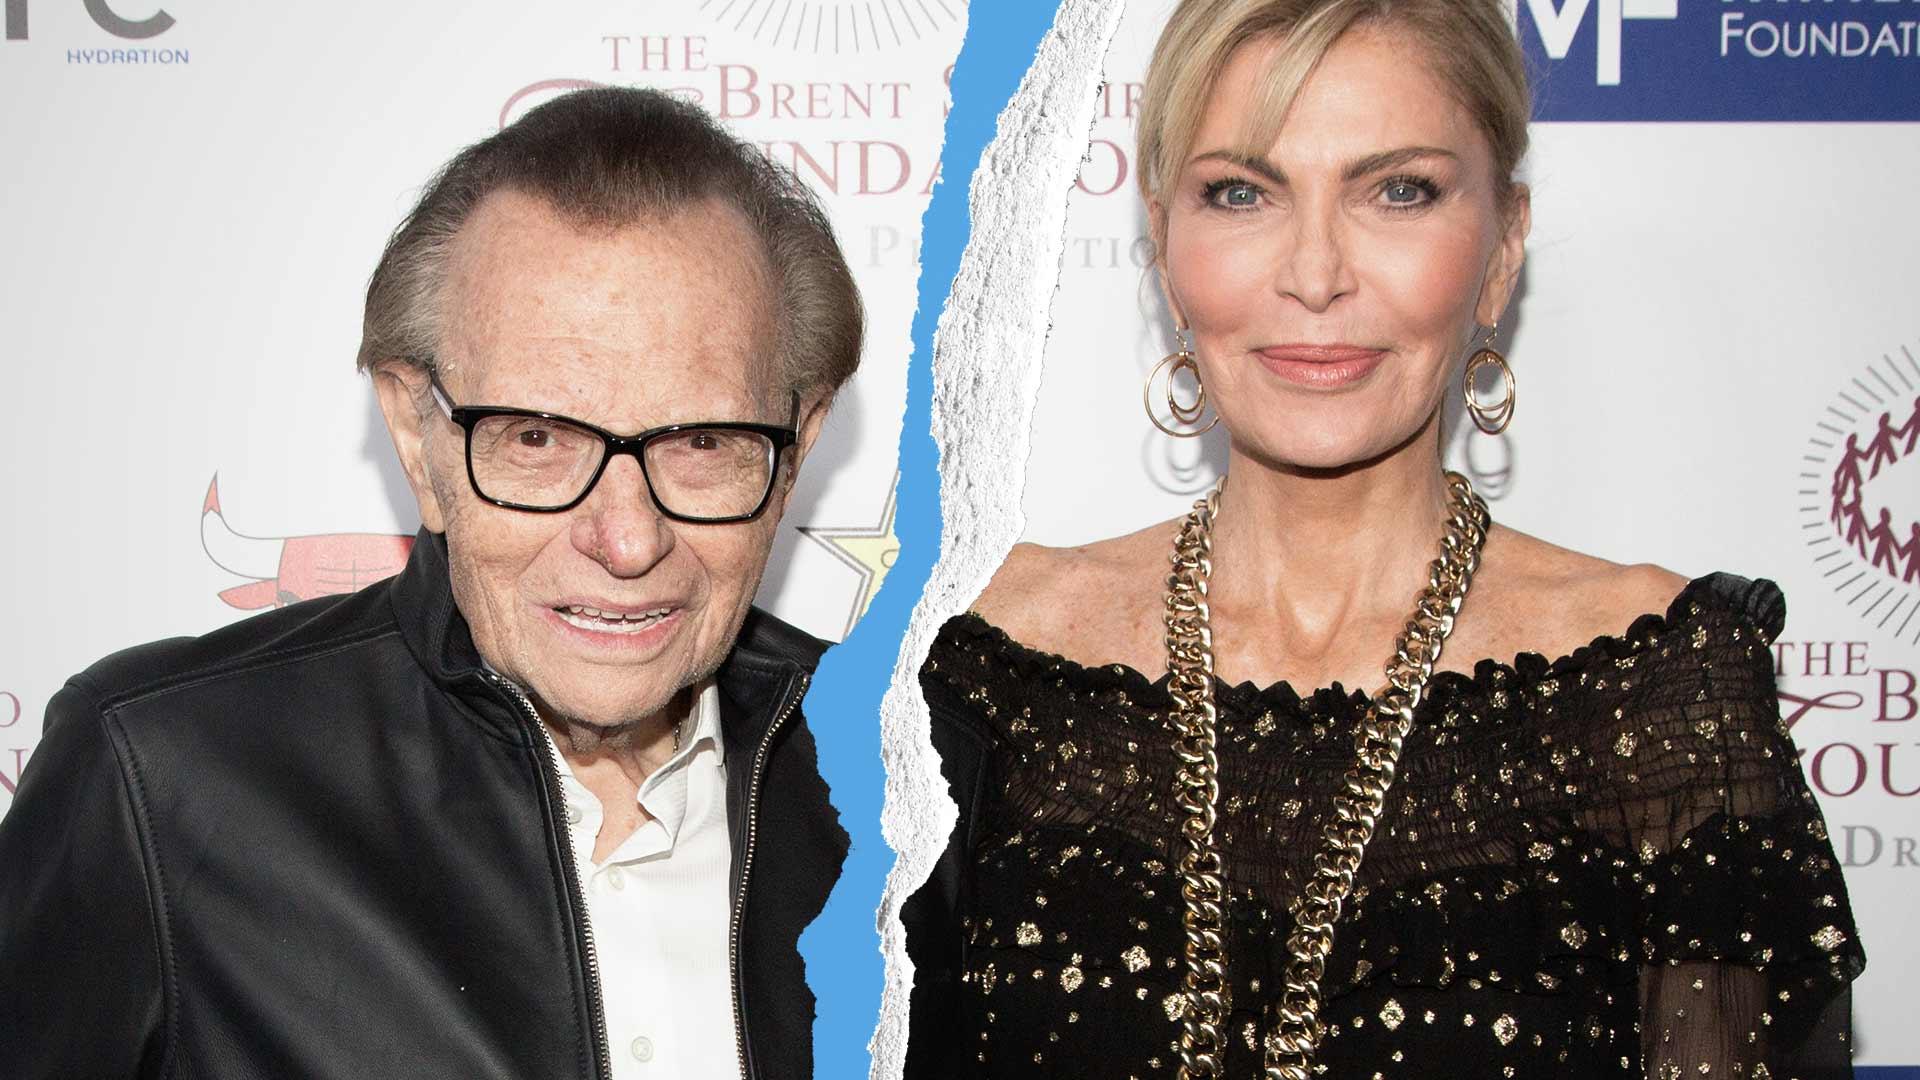 Larry King Files for Divorce from Shawn King After 22 Years